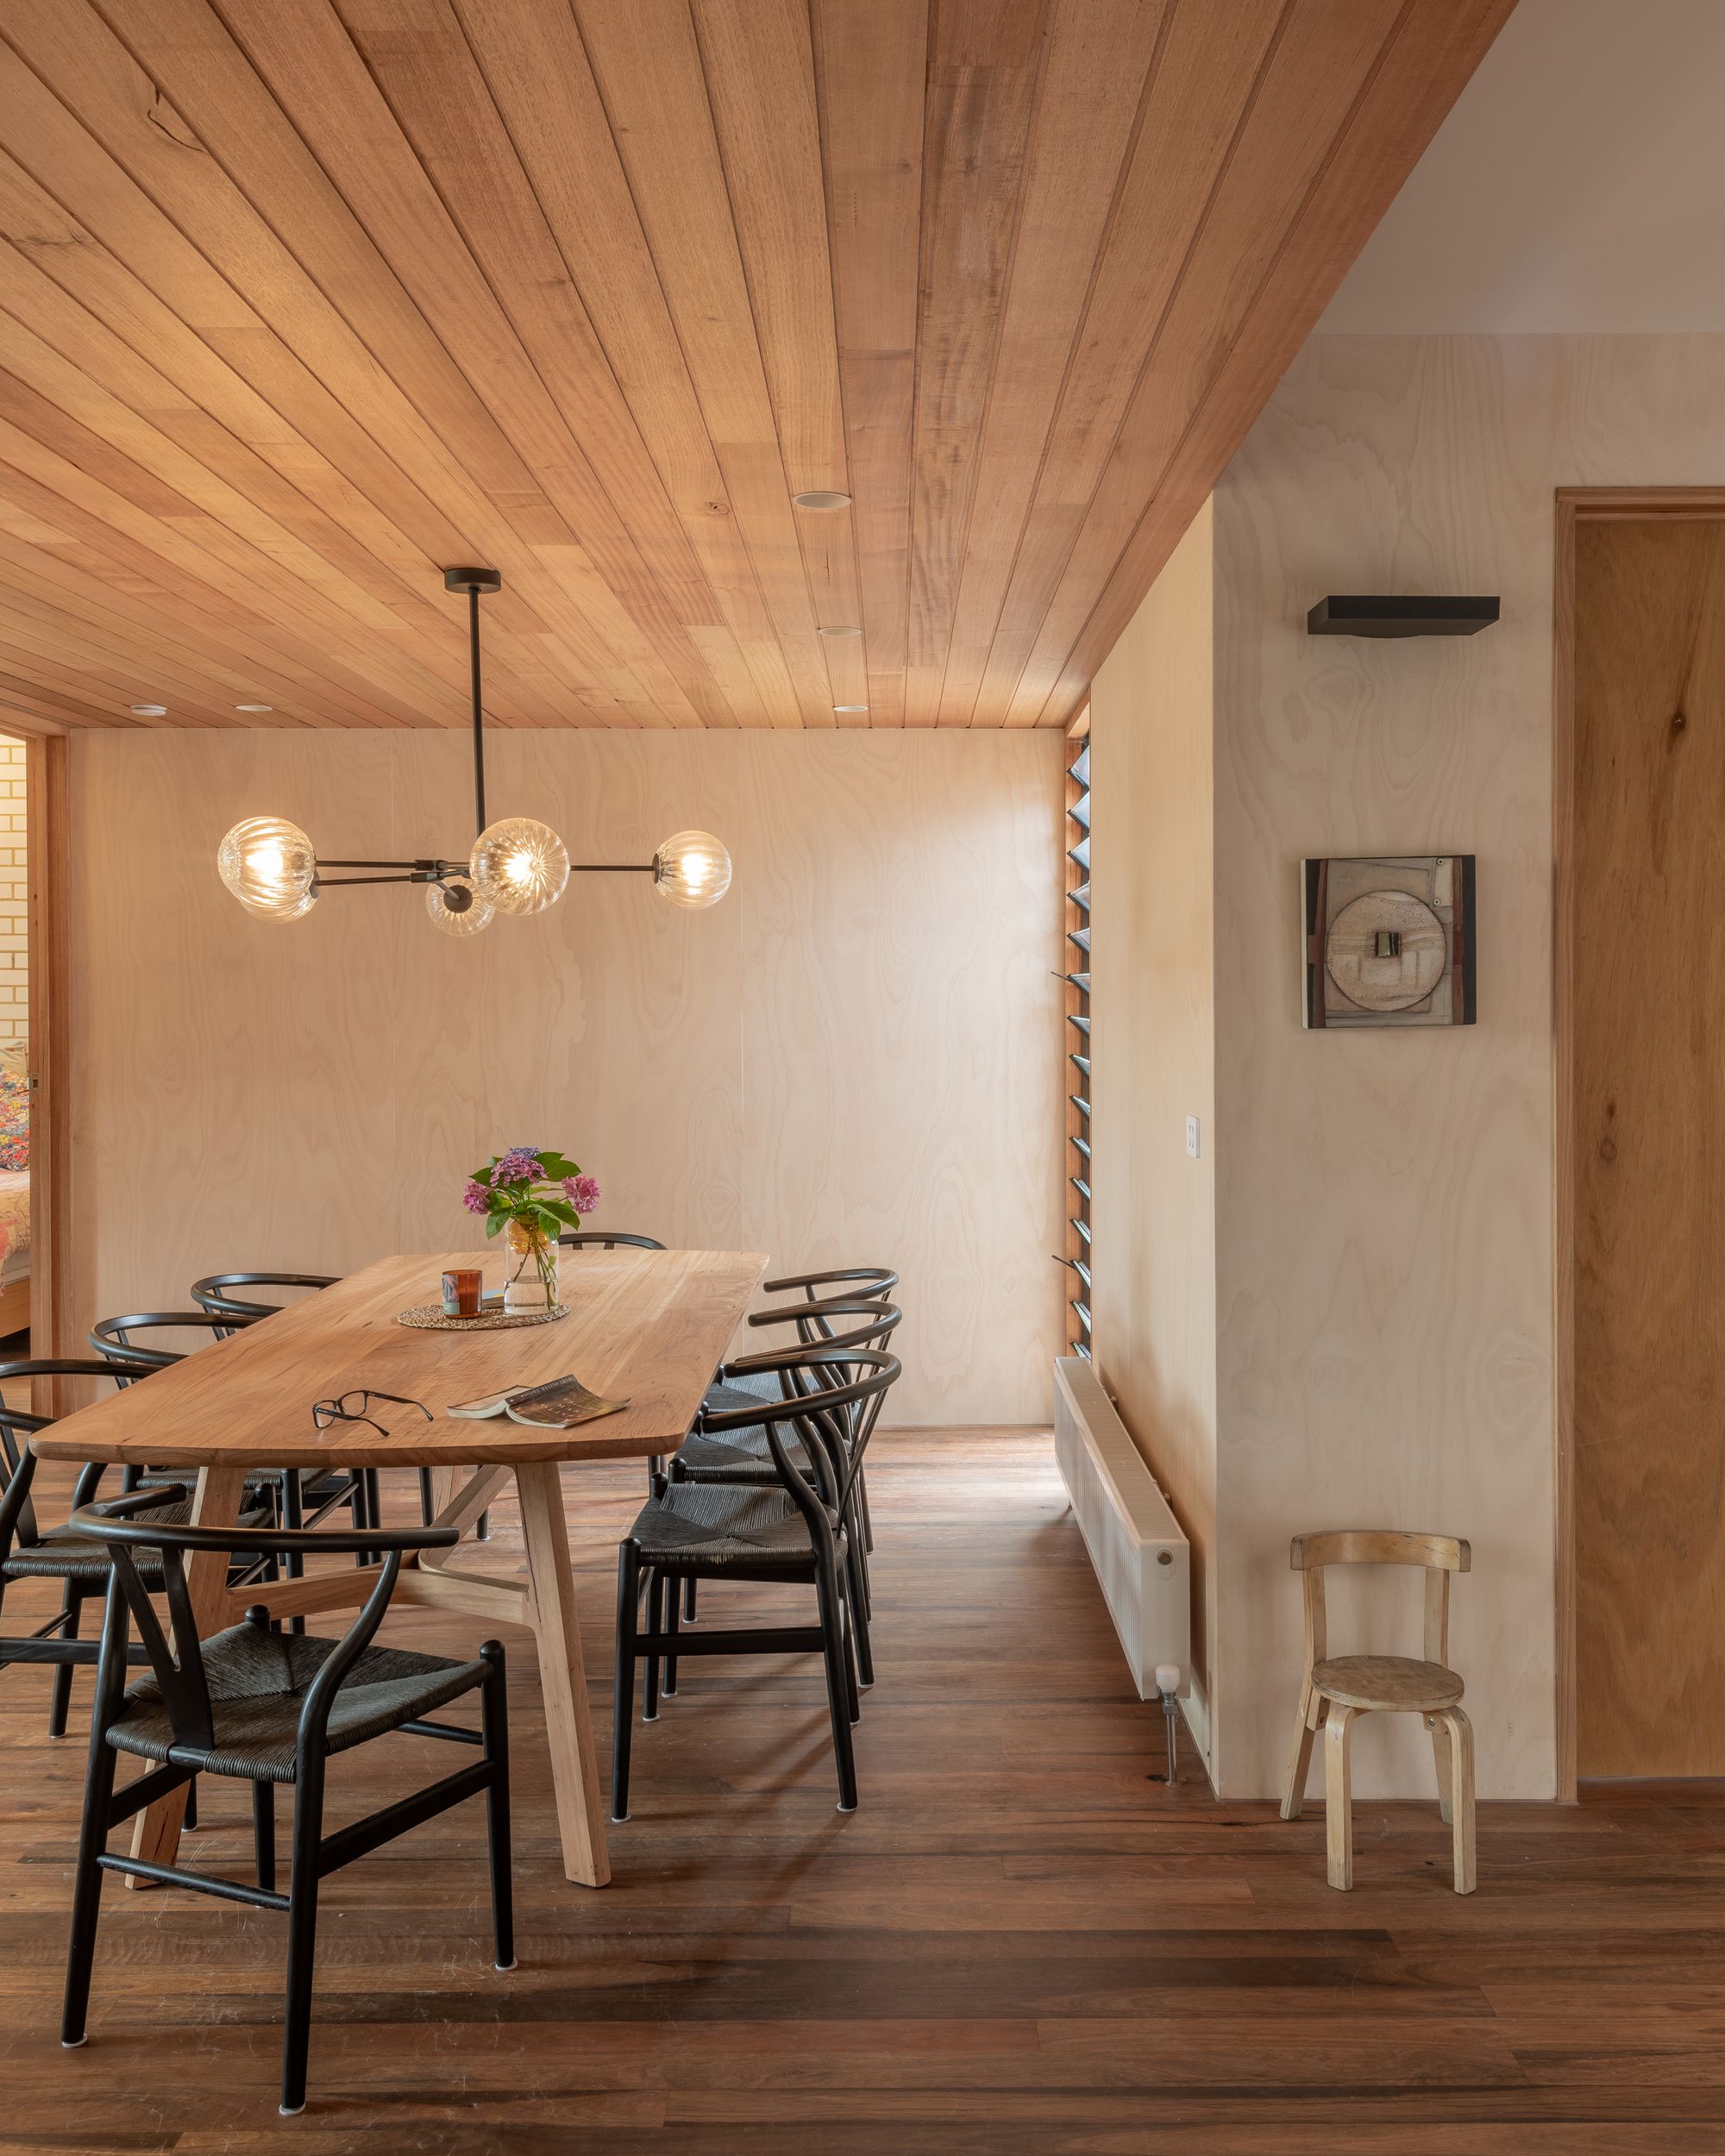 Pinnell-Long House by Harrison & White Architects. View of dining living space with the use of warm timbers